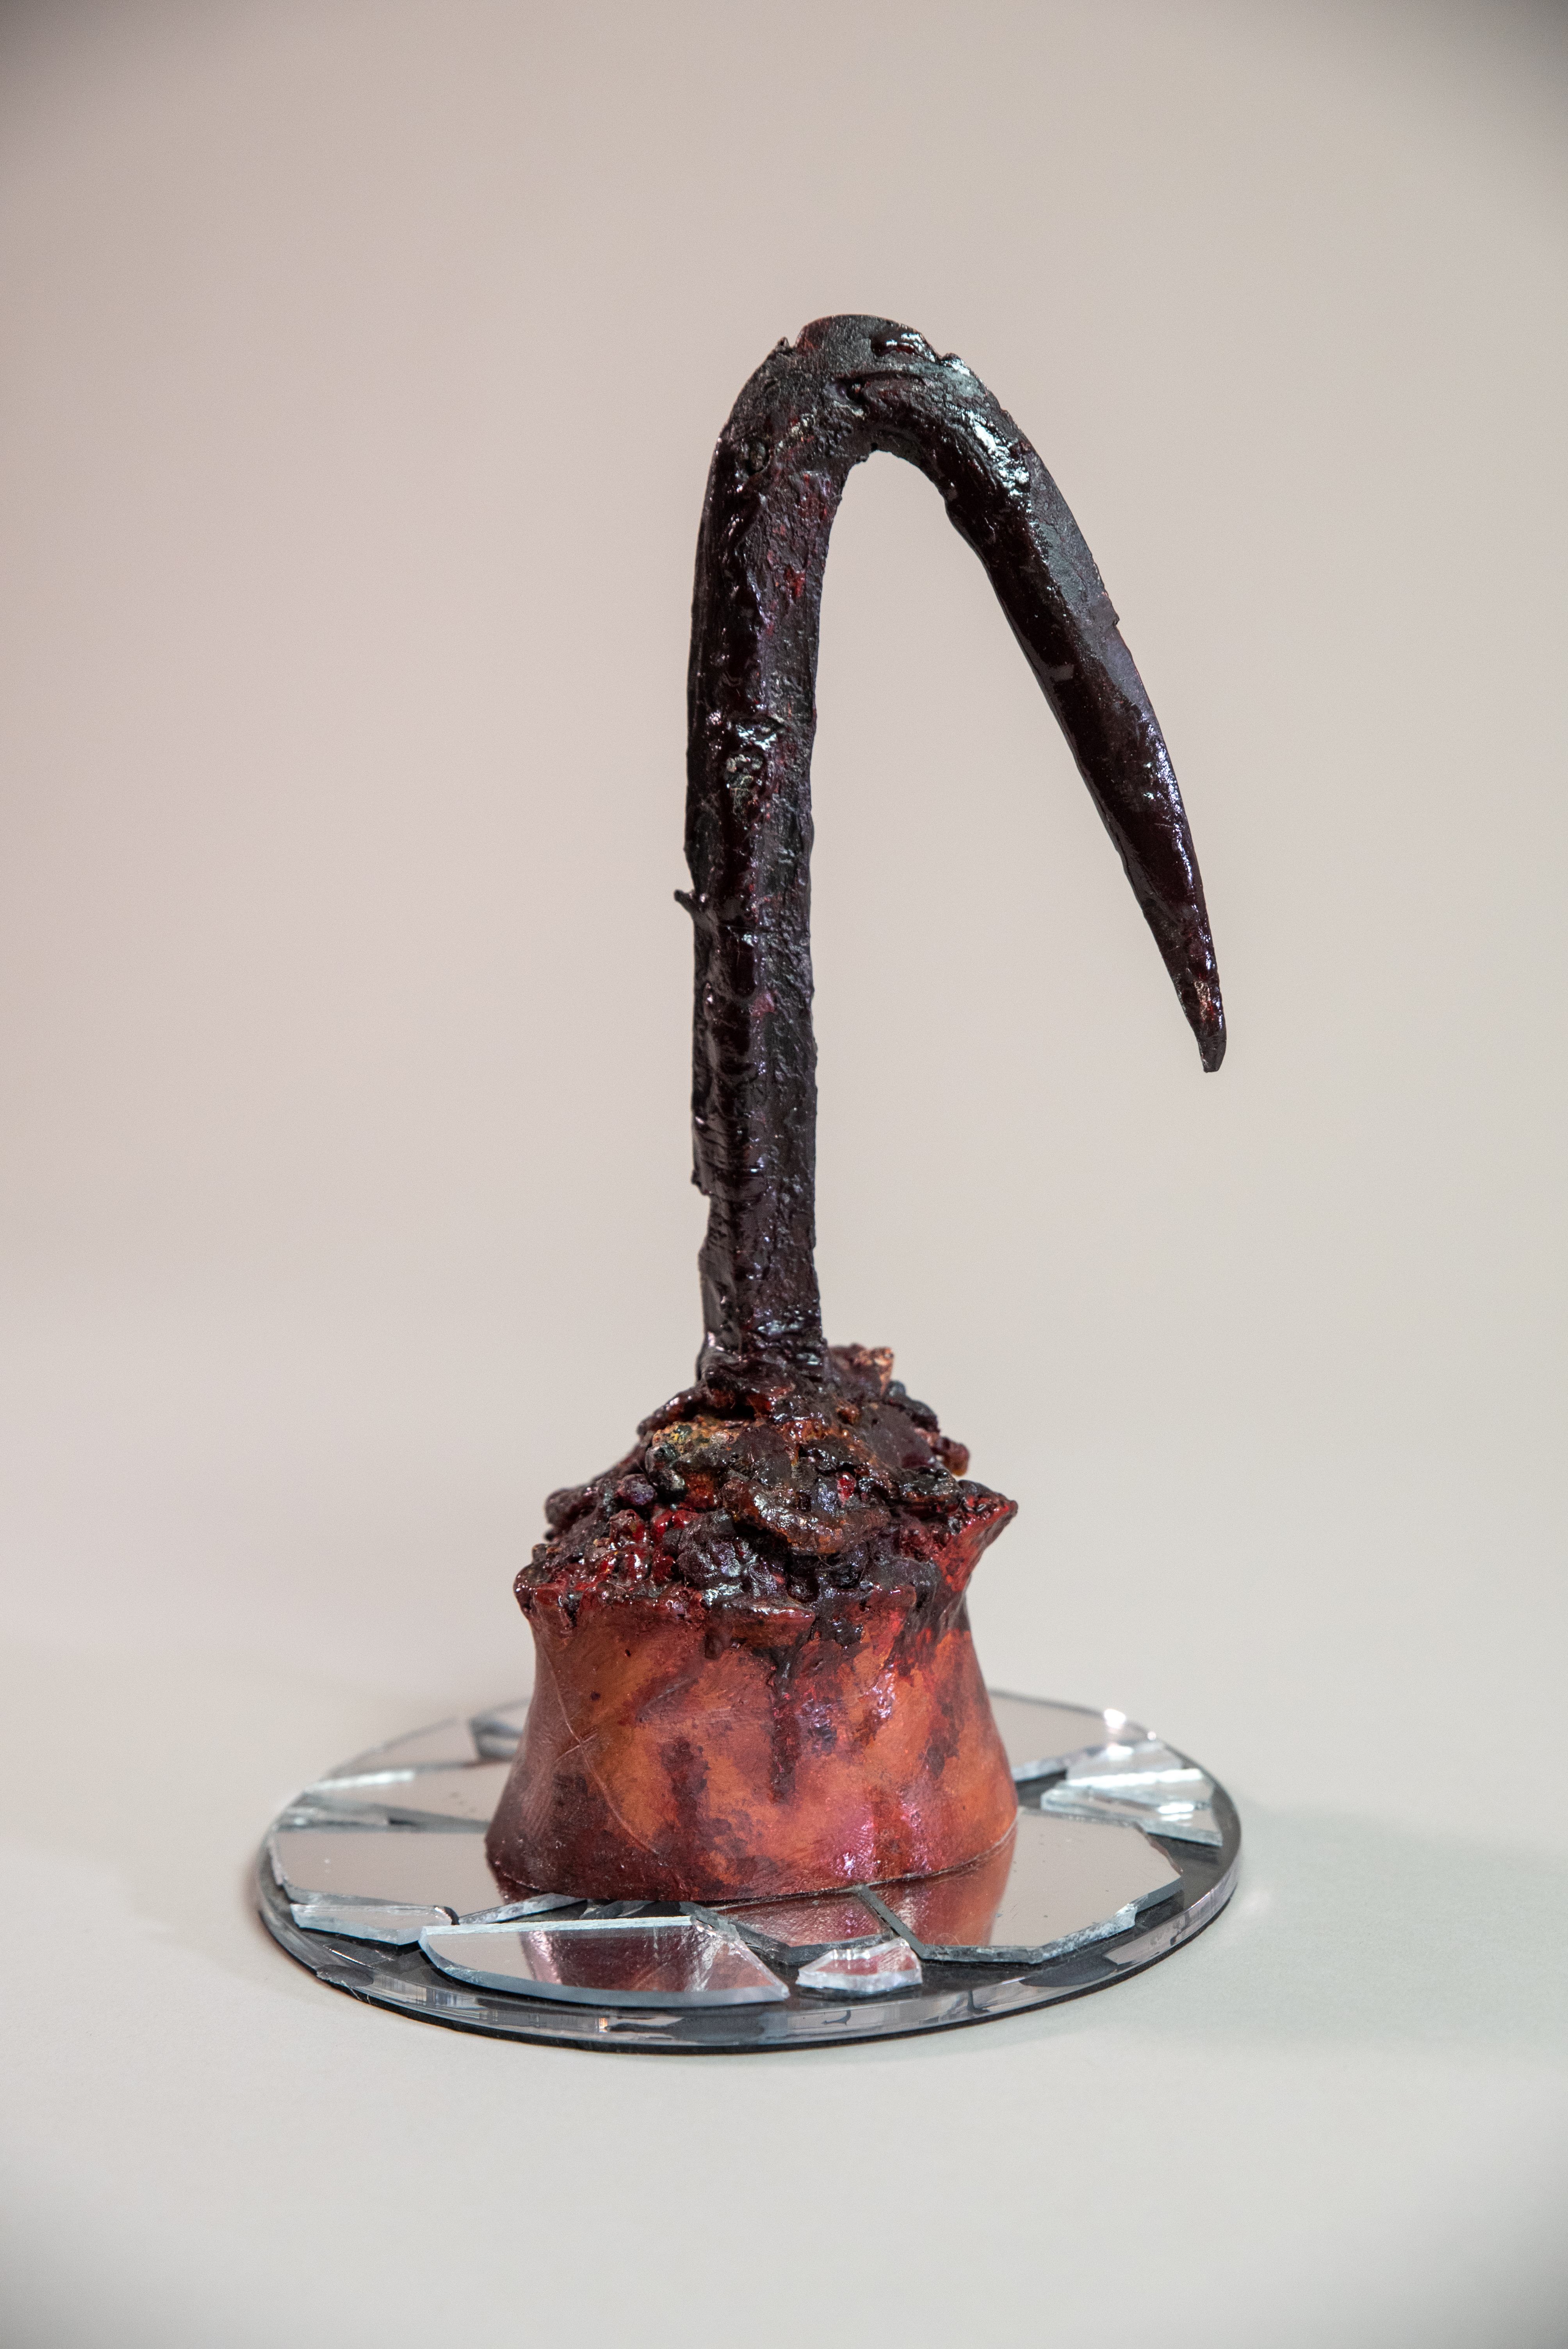 Candyman Hook originally worn by Tony Todd now on display at MoPOP